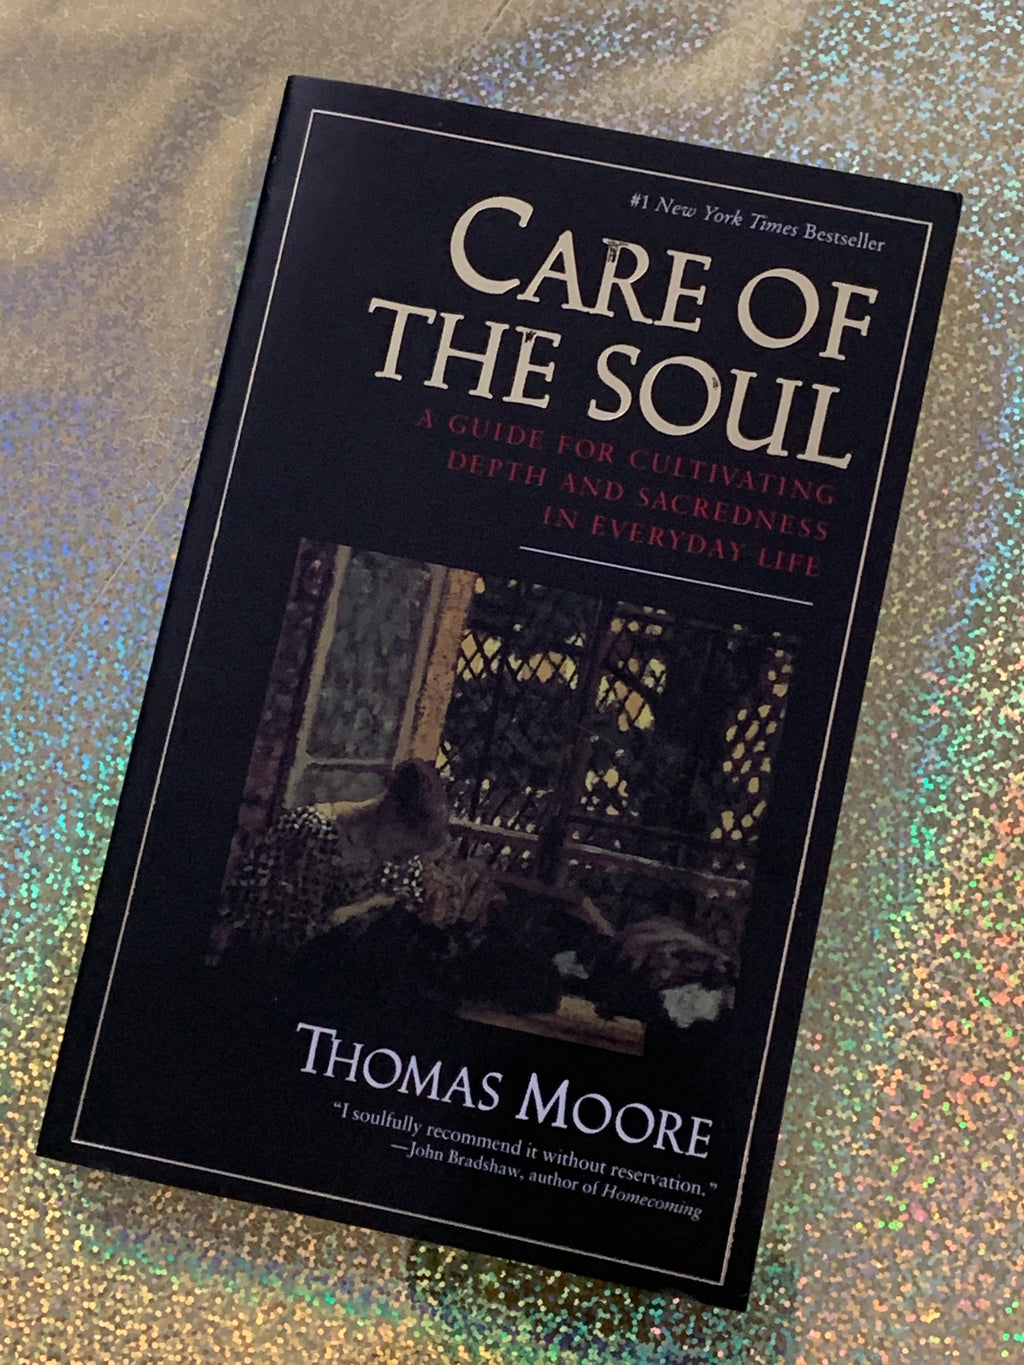 The Care of the Soul-: A Guide for Cultivating Depth and Sacredness in Everyday Life- By Thomas Moore